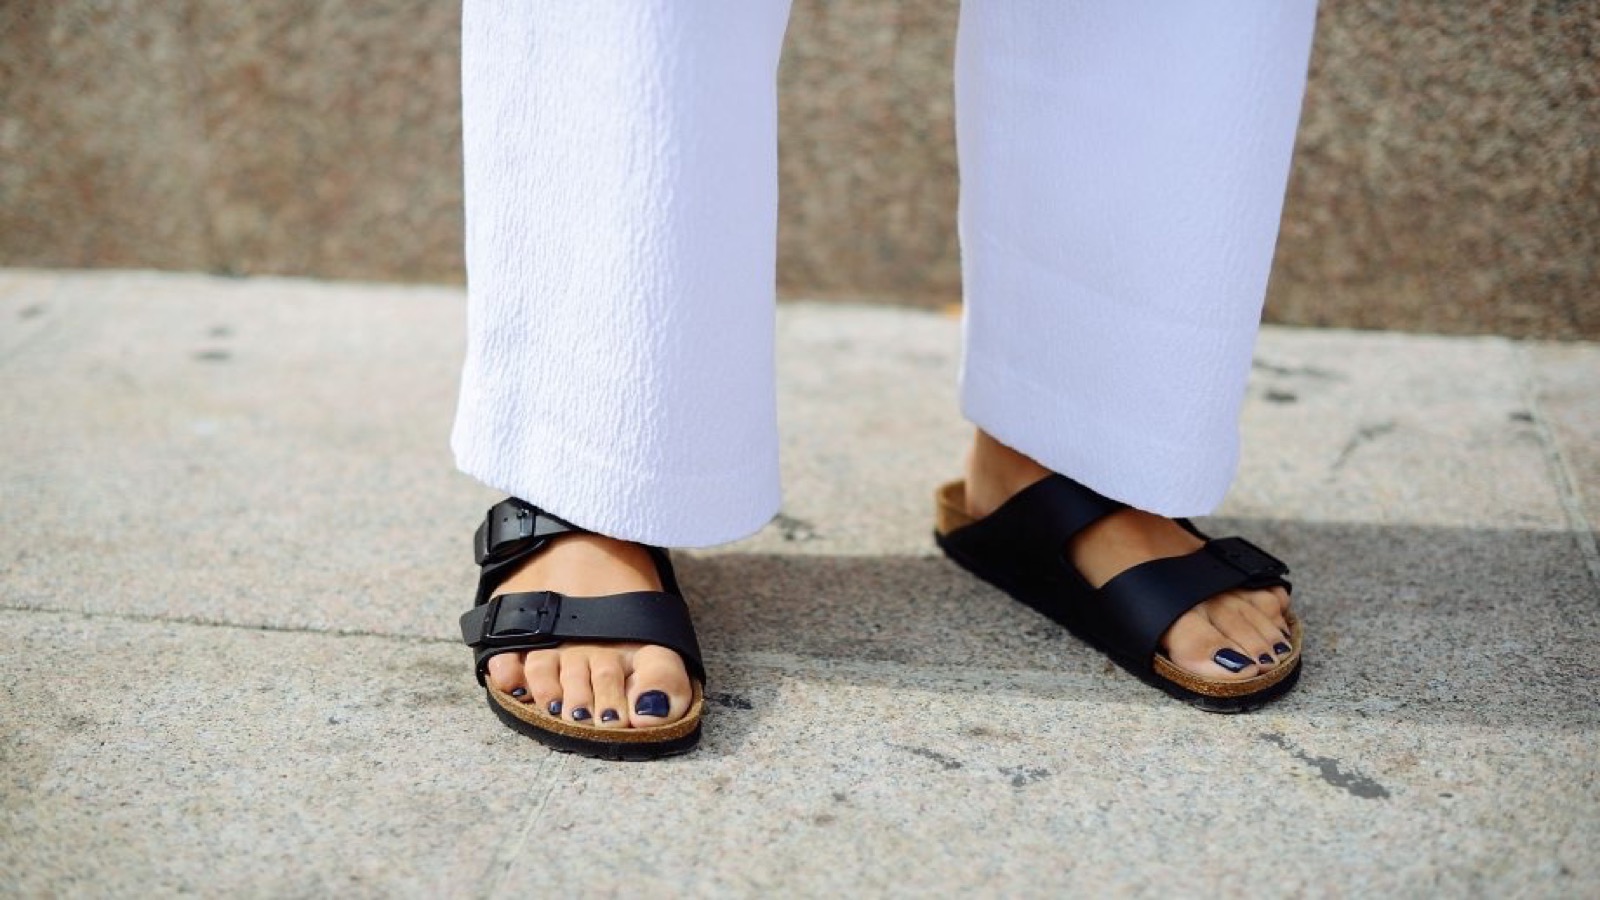 How Birkenstock went from 'ugly' sandal to trendy fashion staple